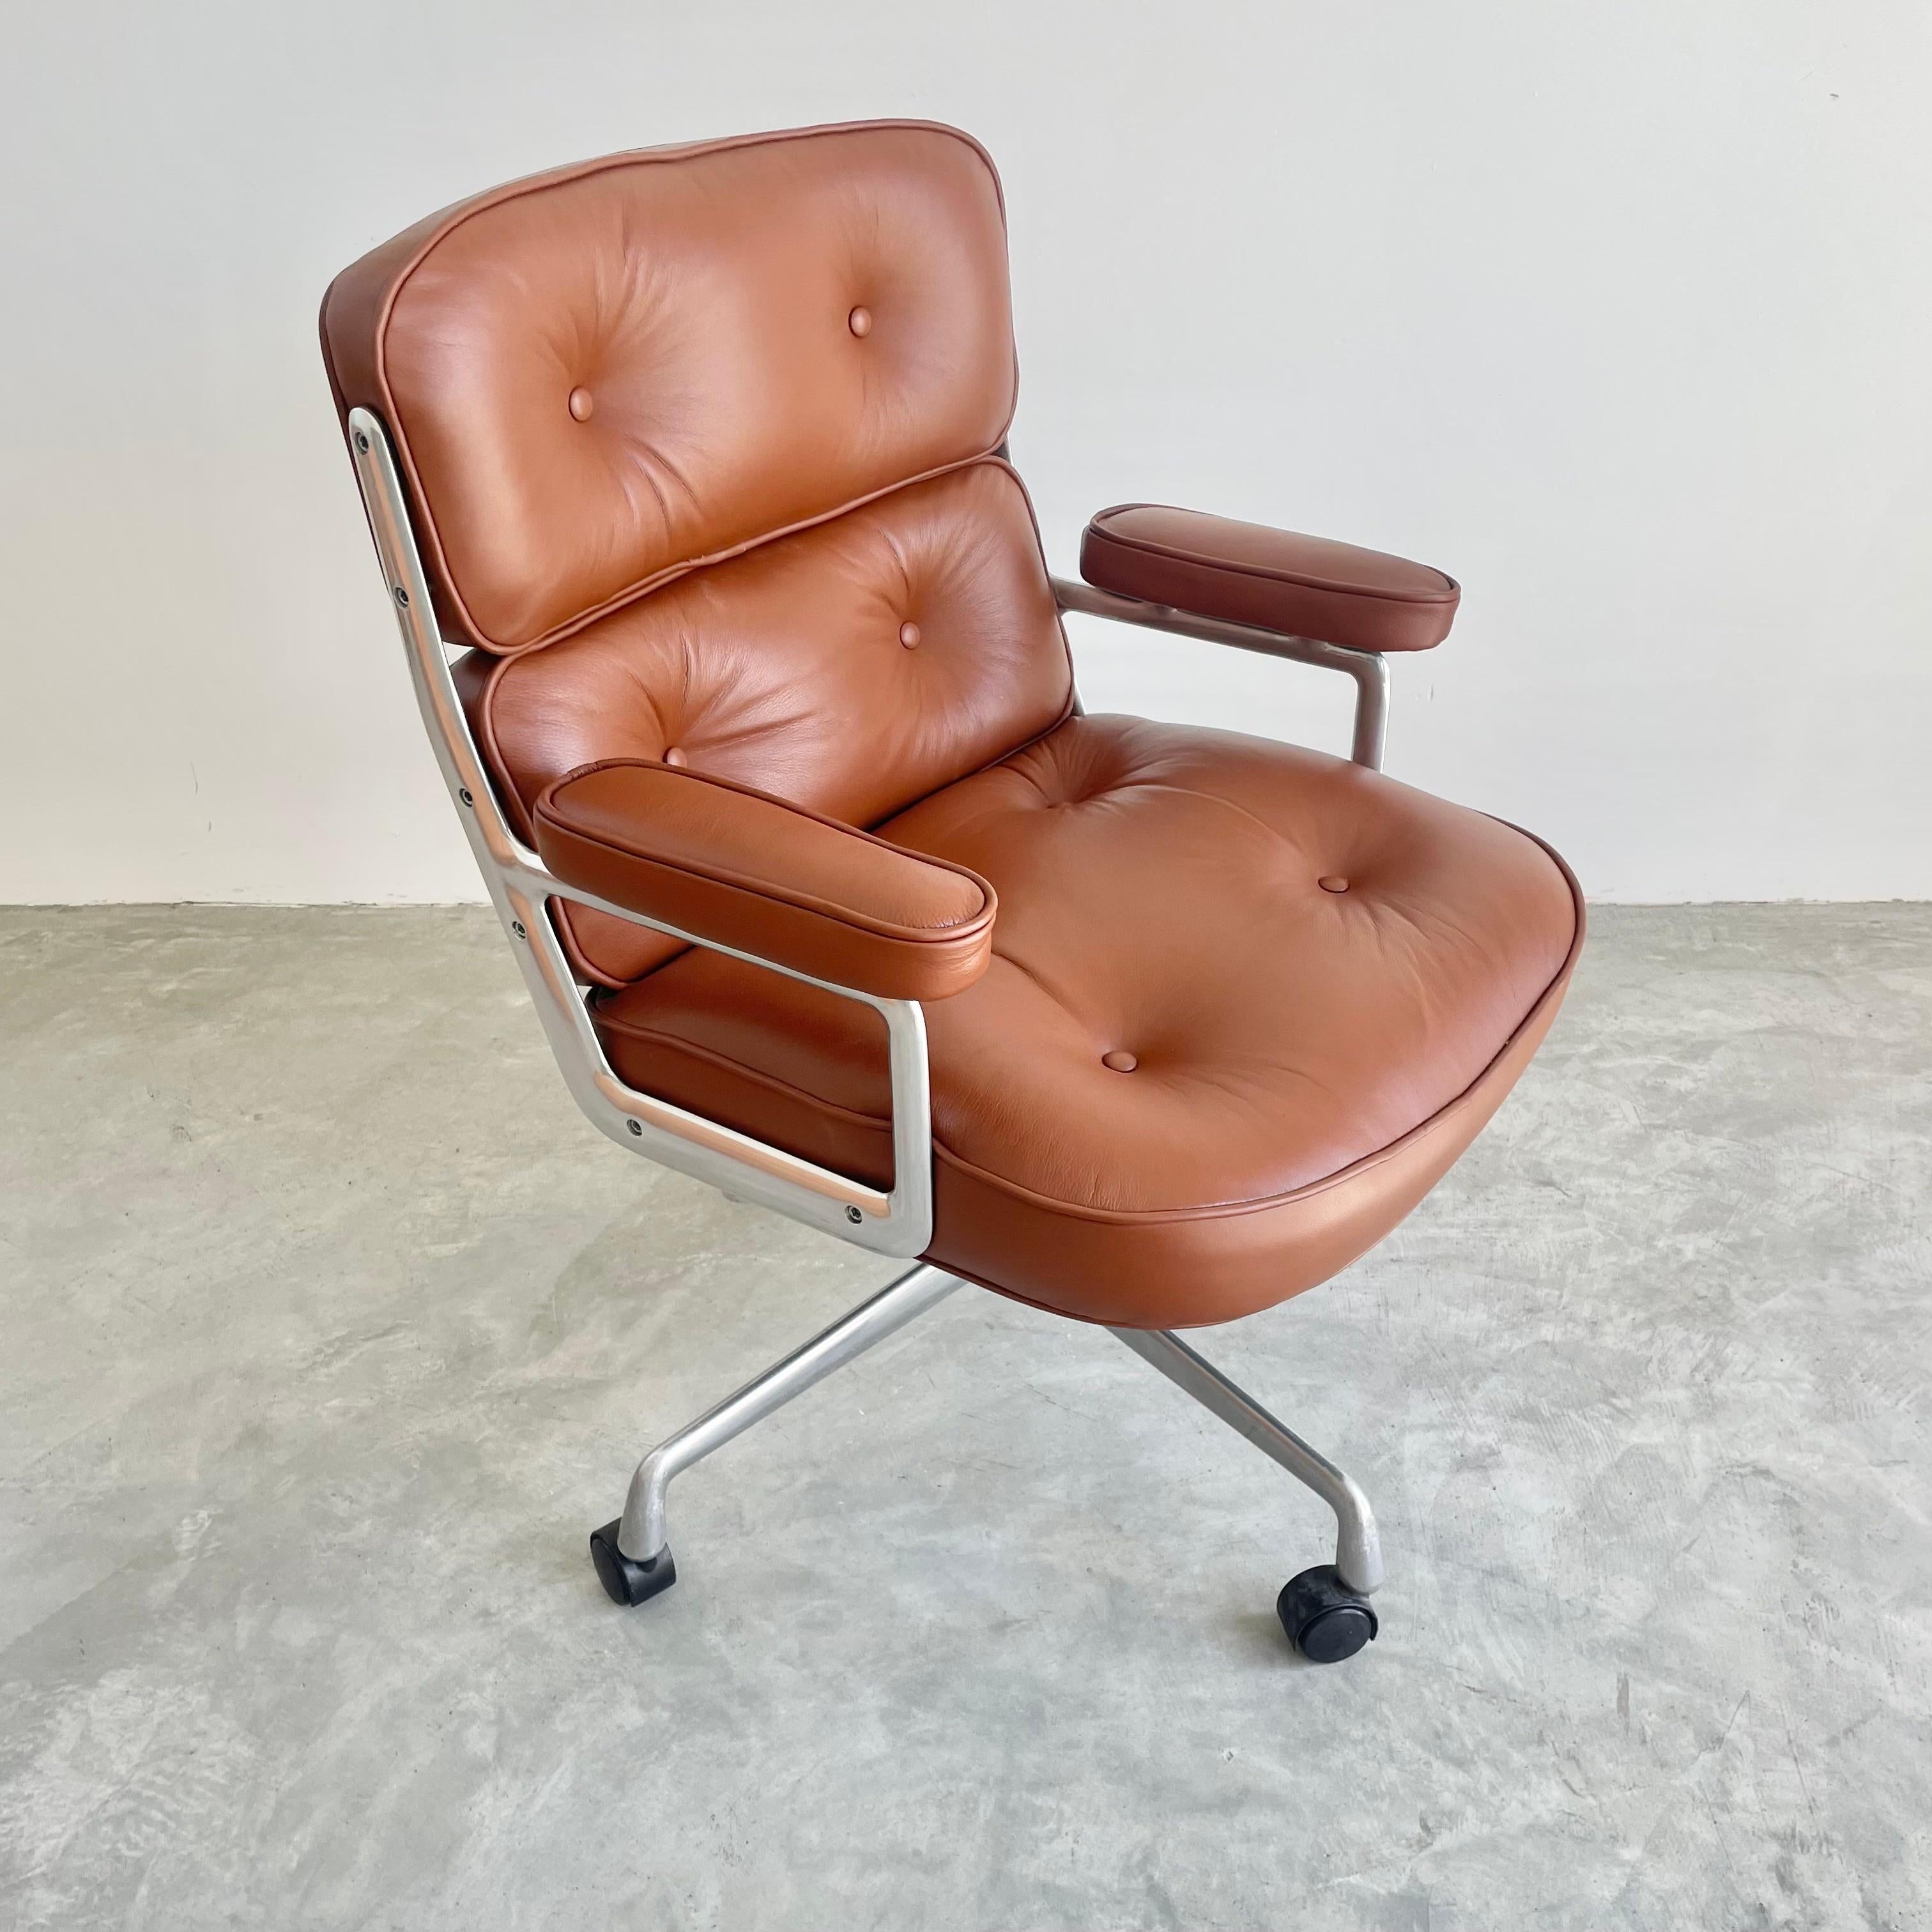 American Eames Time Life Chair in Brown Leather for Herman Miller, 1984 USA For Sale